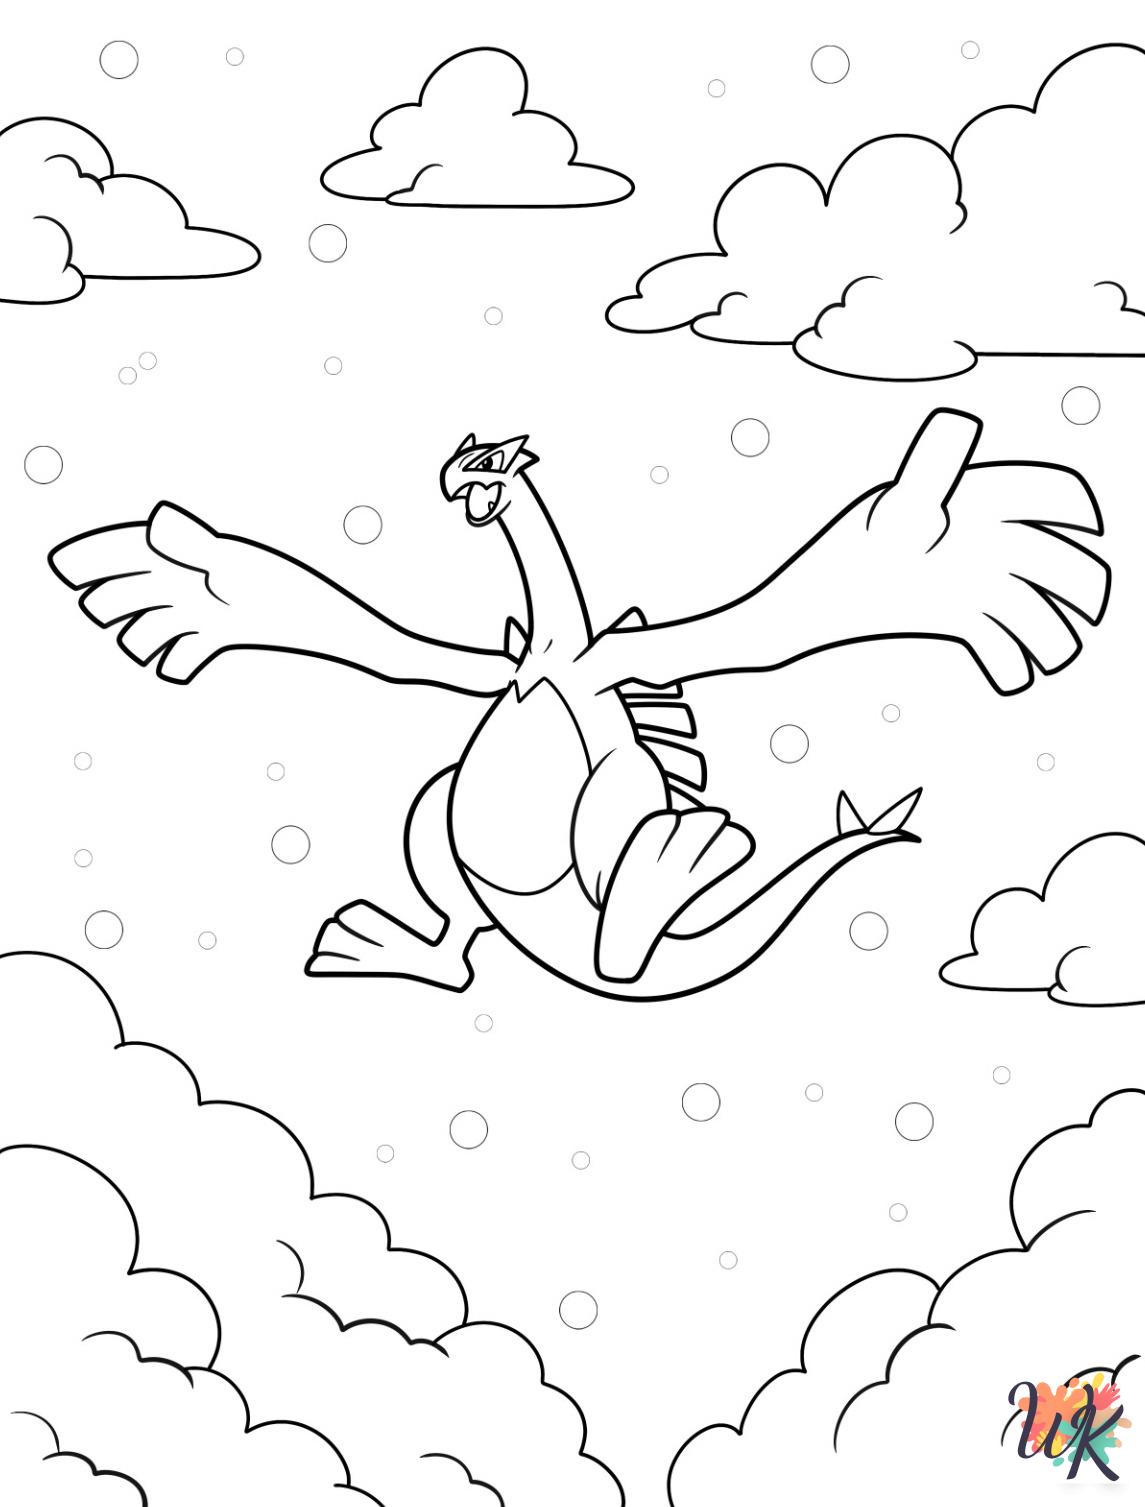 Legendary Pokemon printable coloring pages